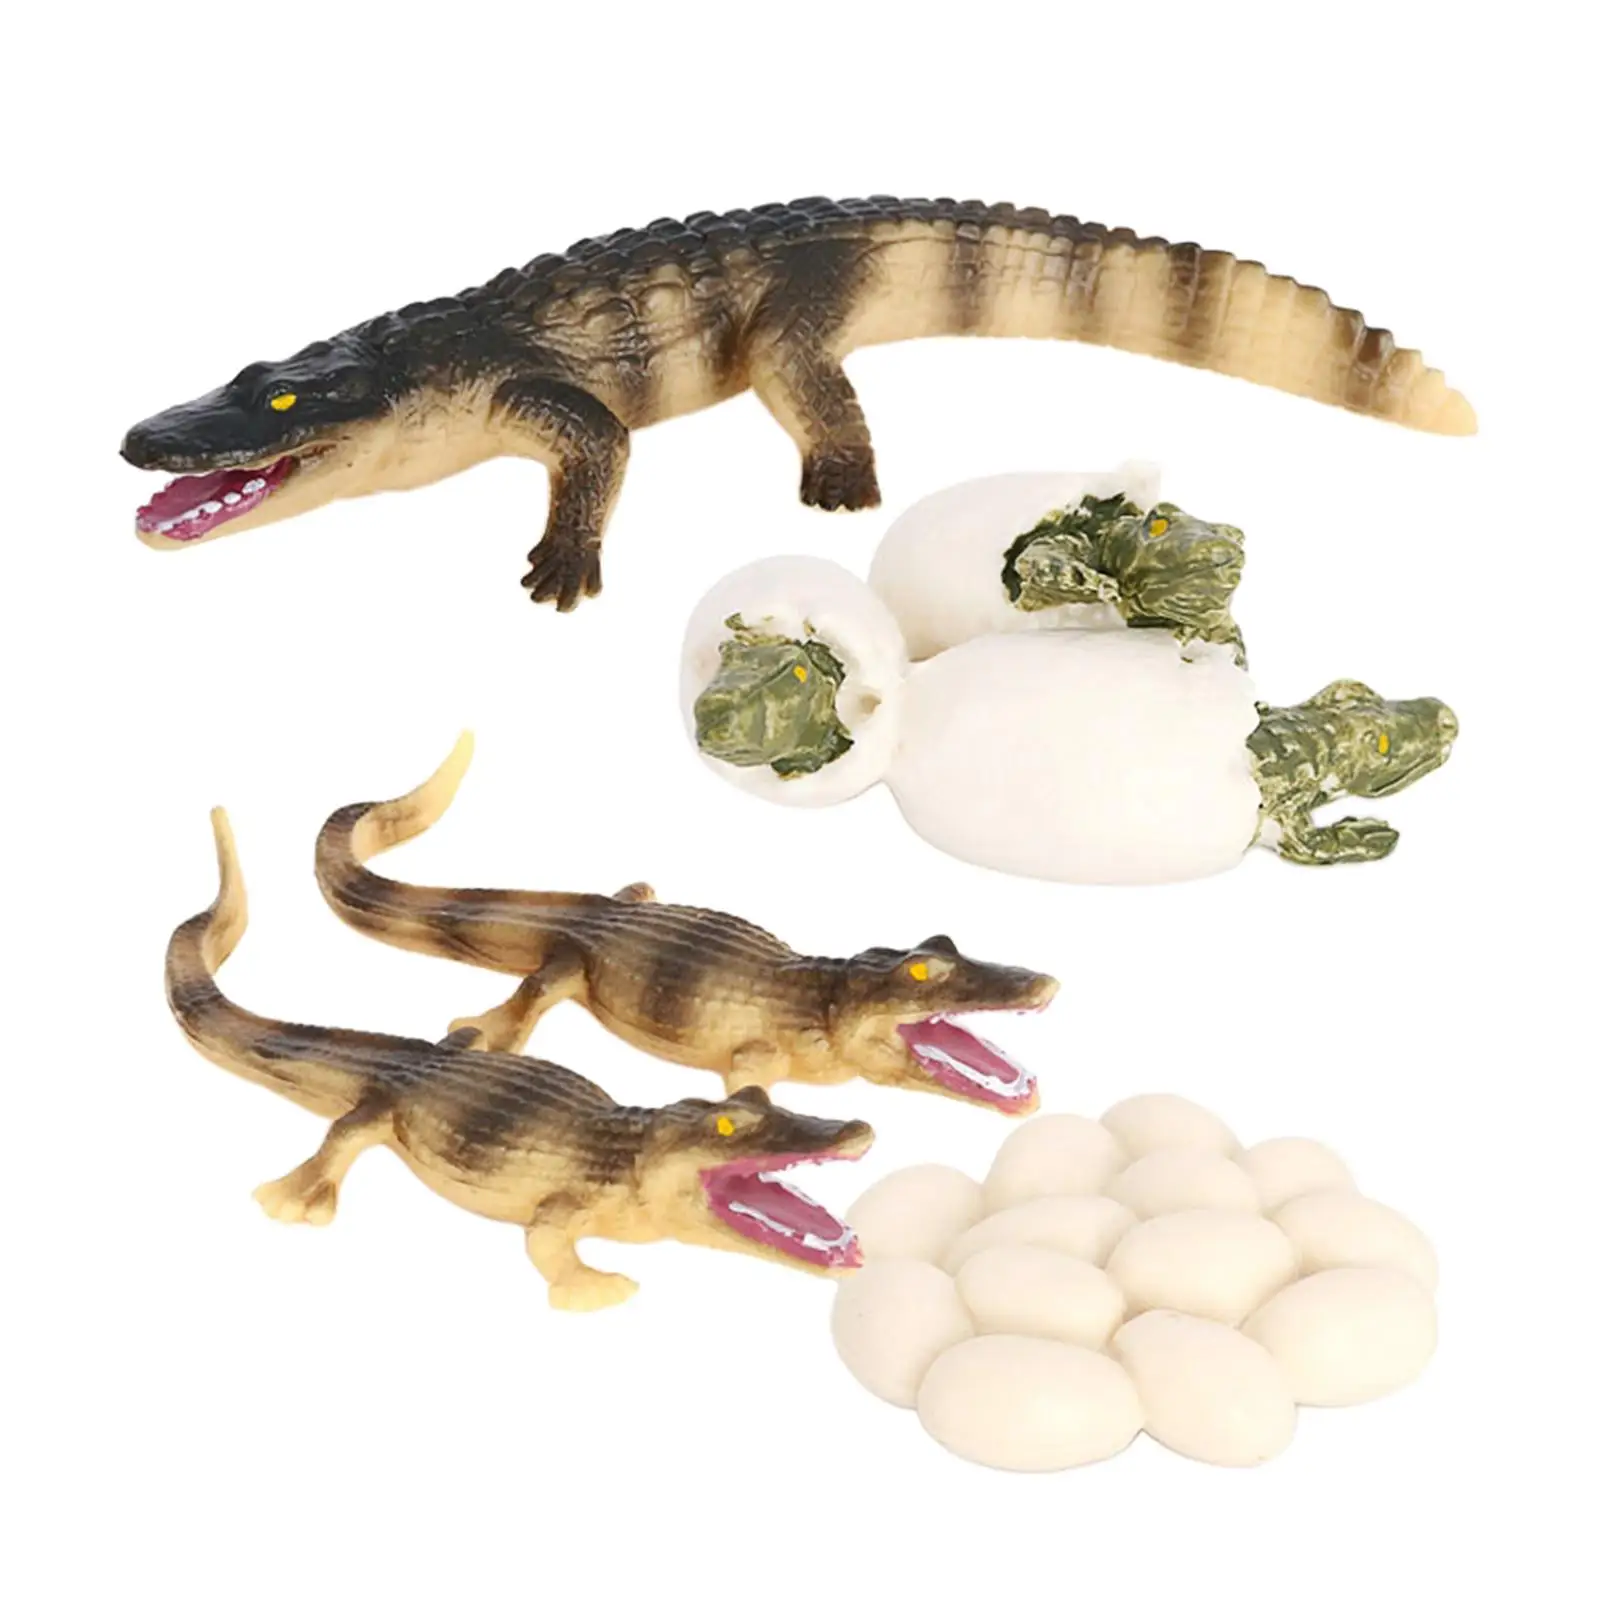 Assorted Plastic Insects Crocodile Bugs Figures Model Kids Educational Toys